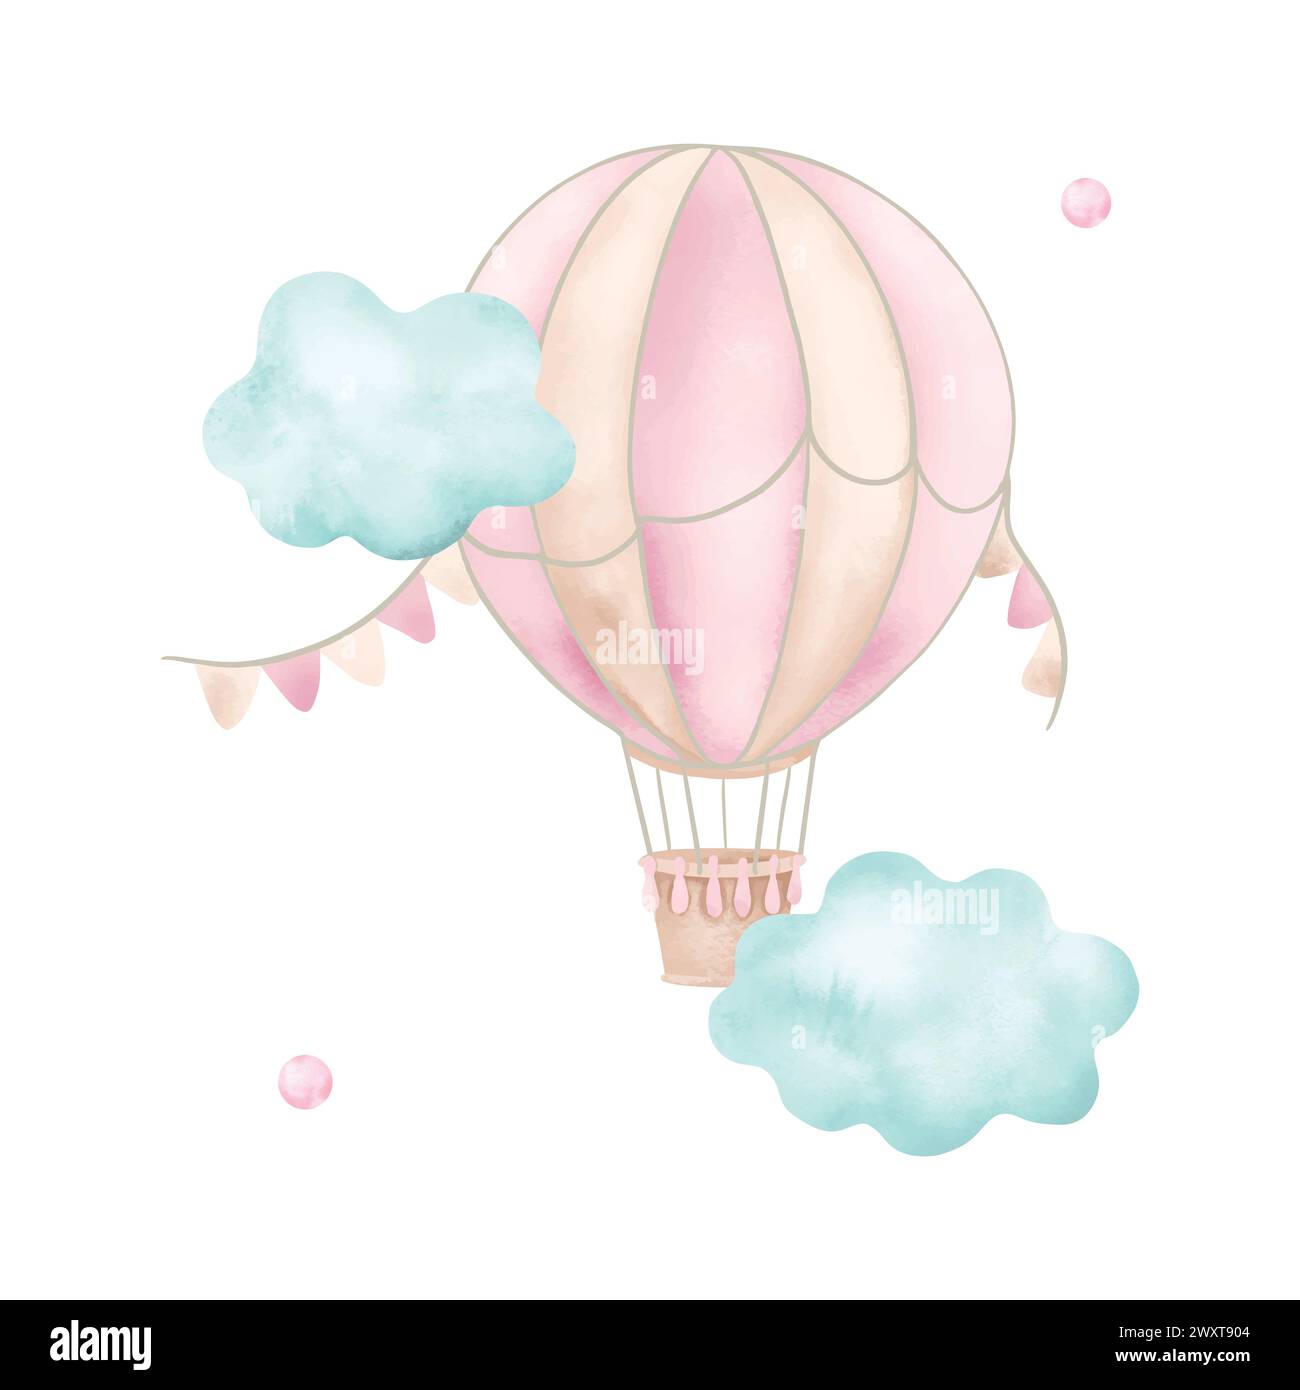 Air balloon, flags, clouds, watercolor. Hand drawn vector illustration in pastel colors for cards, invitations, room design, websites, covers. Vintage Stock Vector